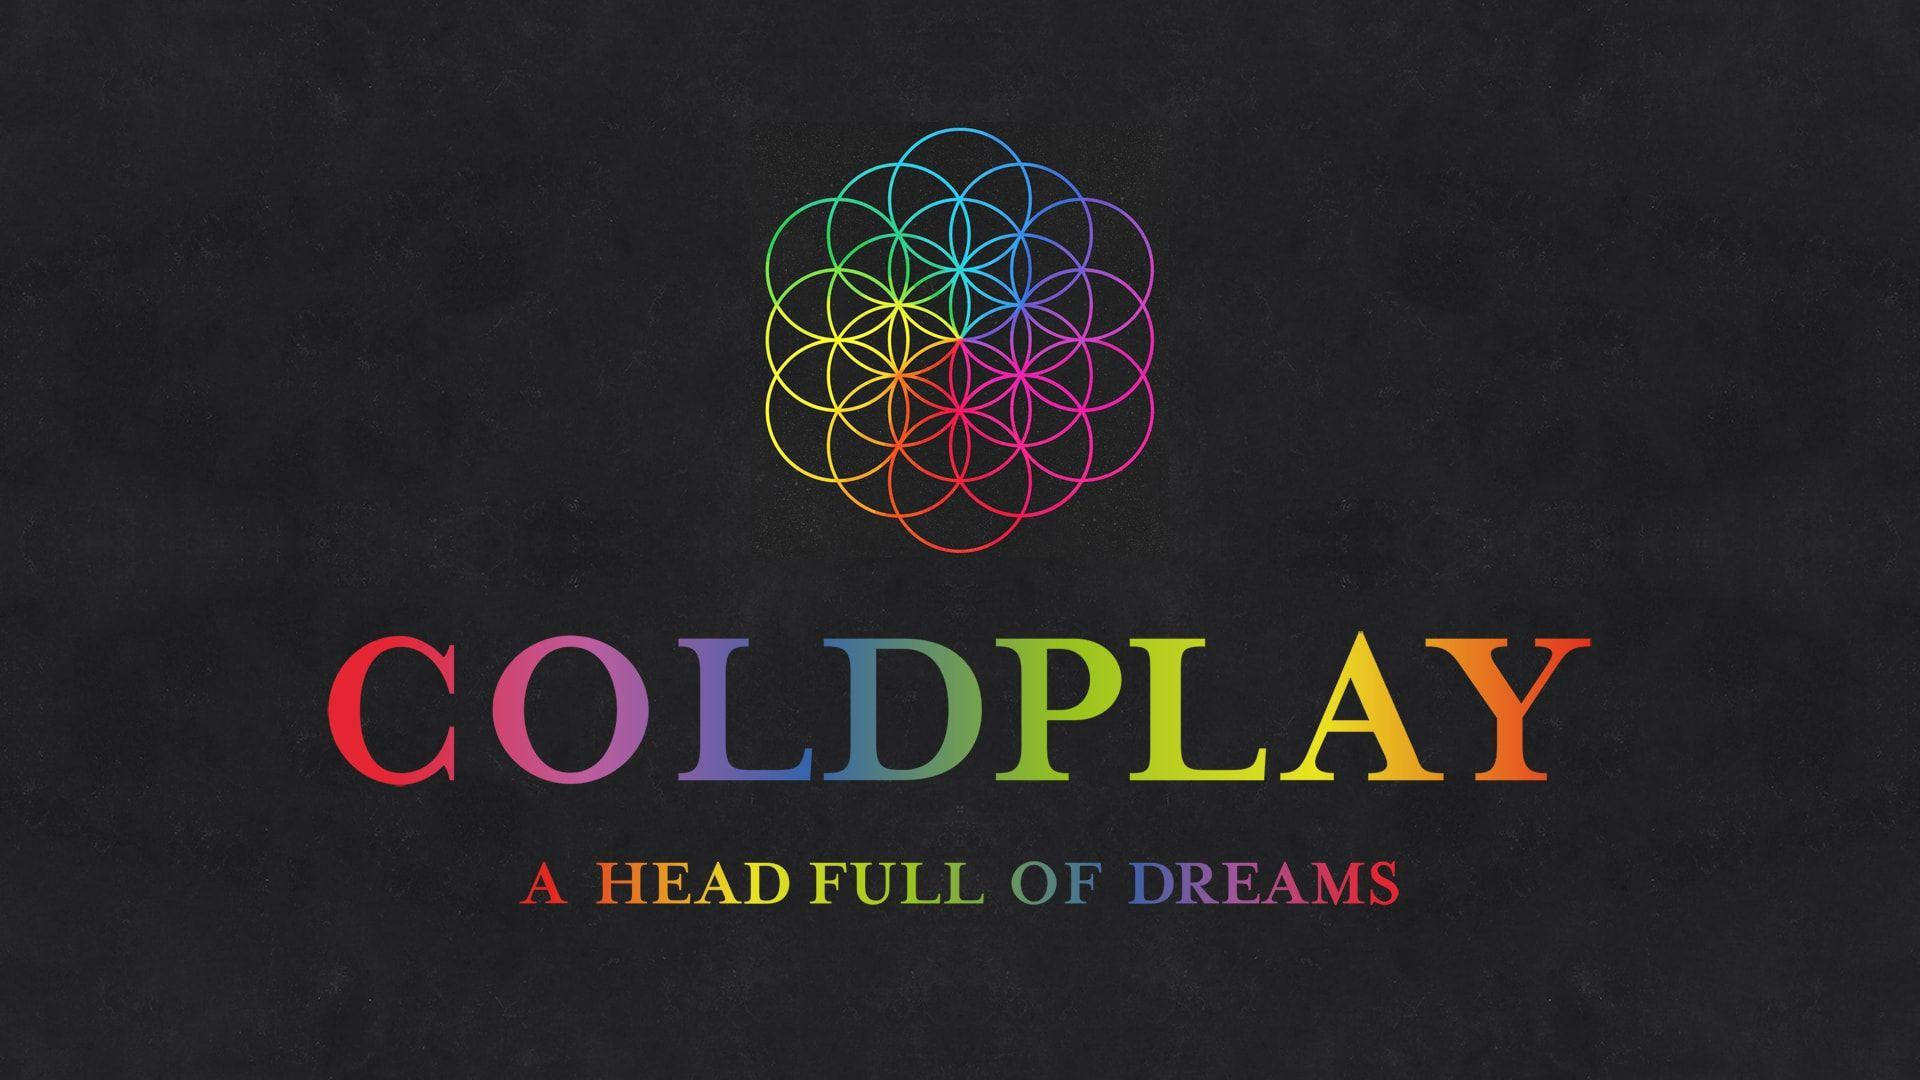 Coldplay Background Photos